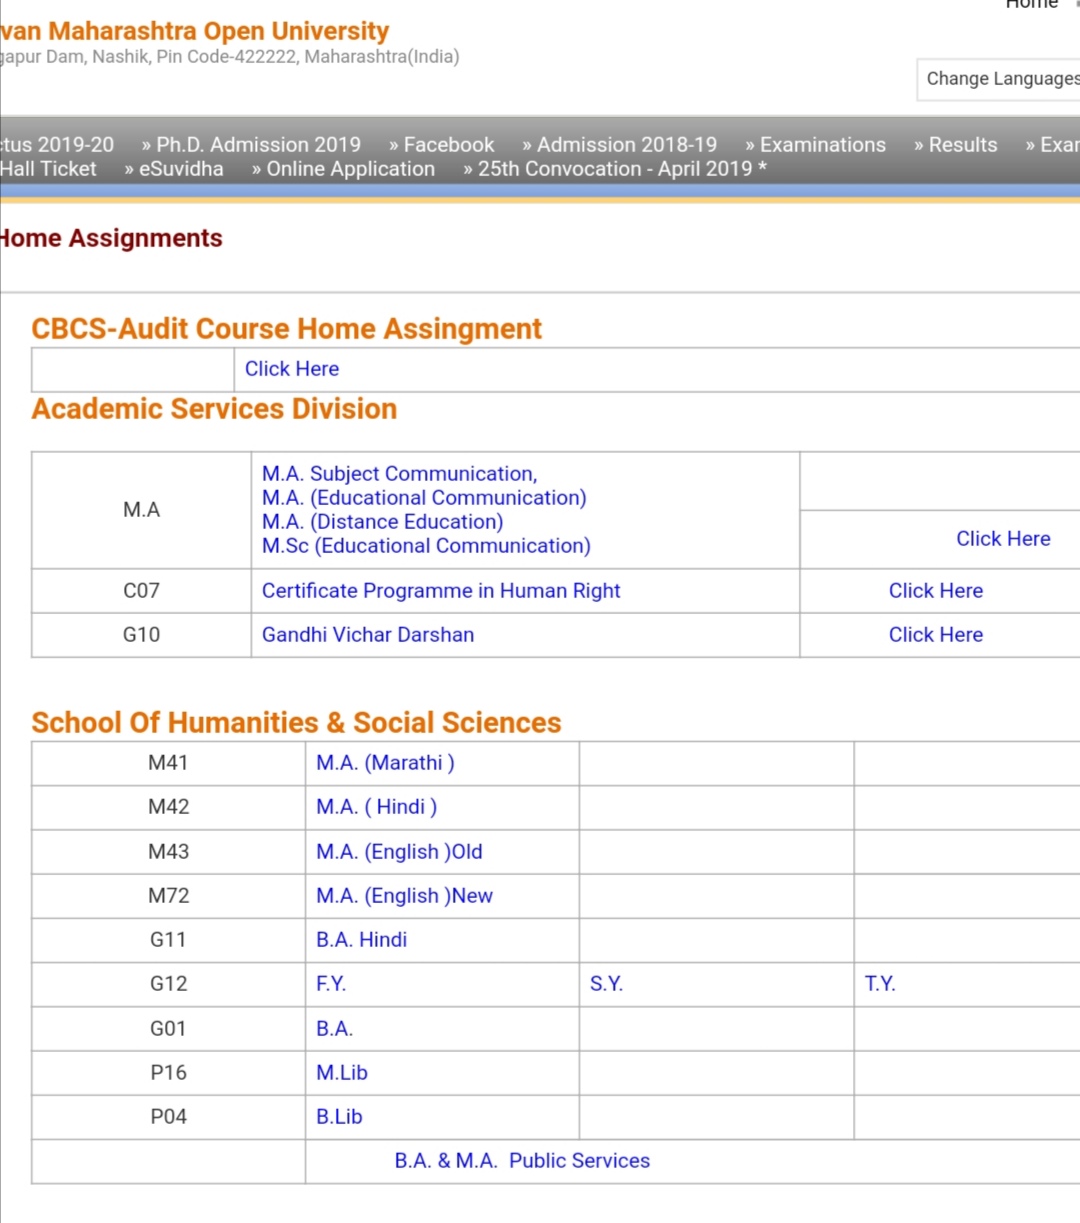 ycmou home assignment student login